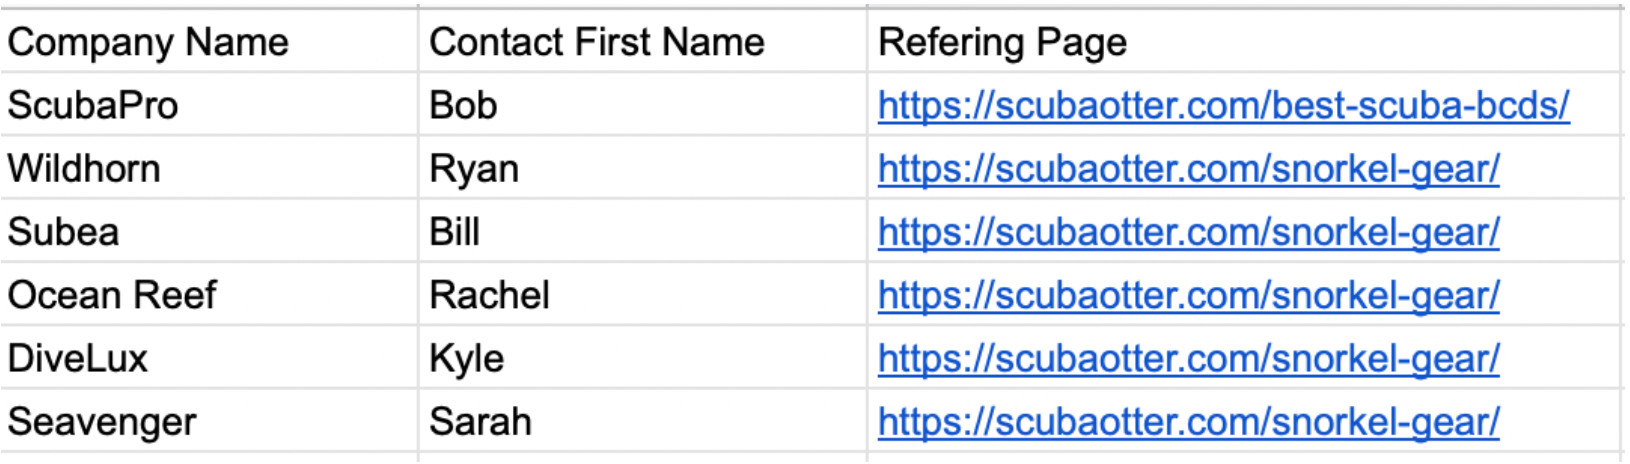 Example of an email outreach spreadsheet